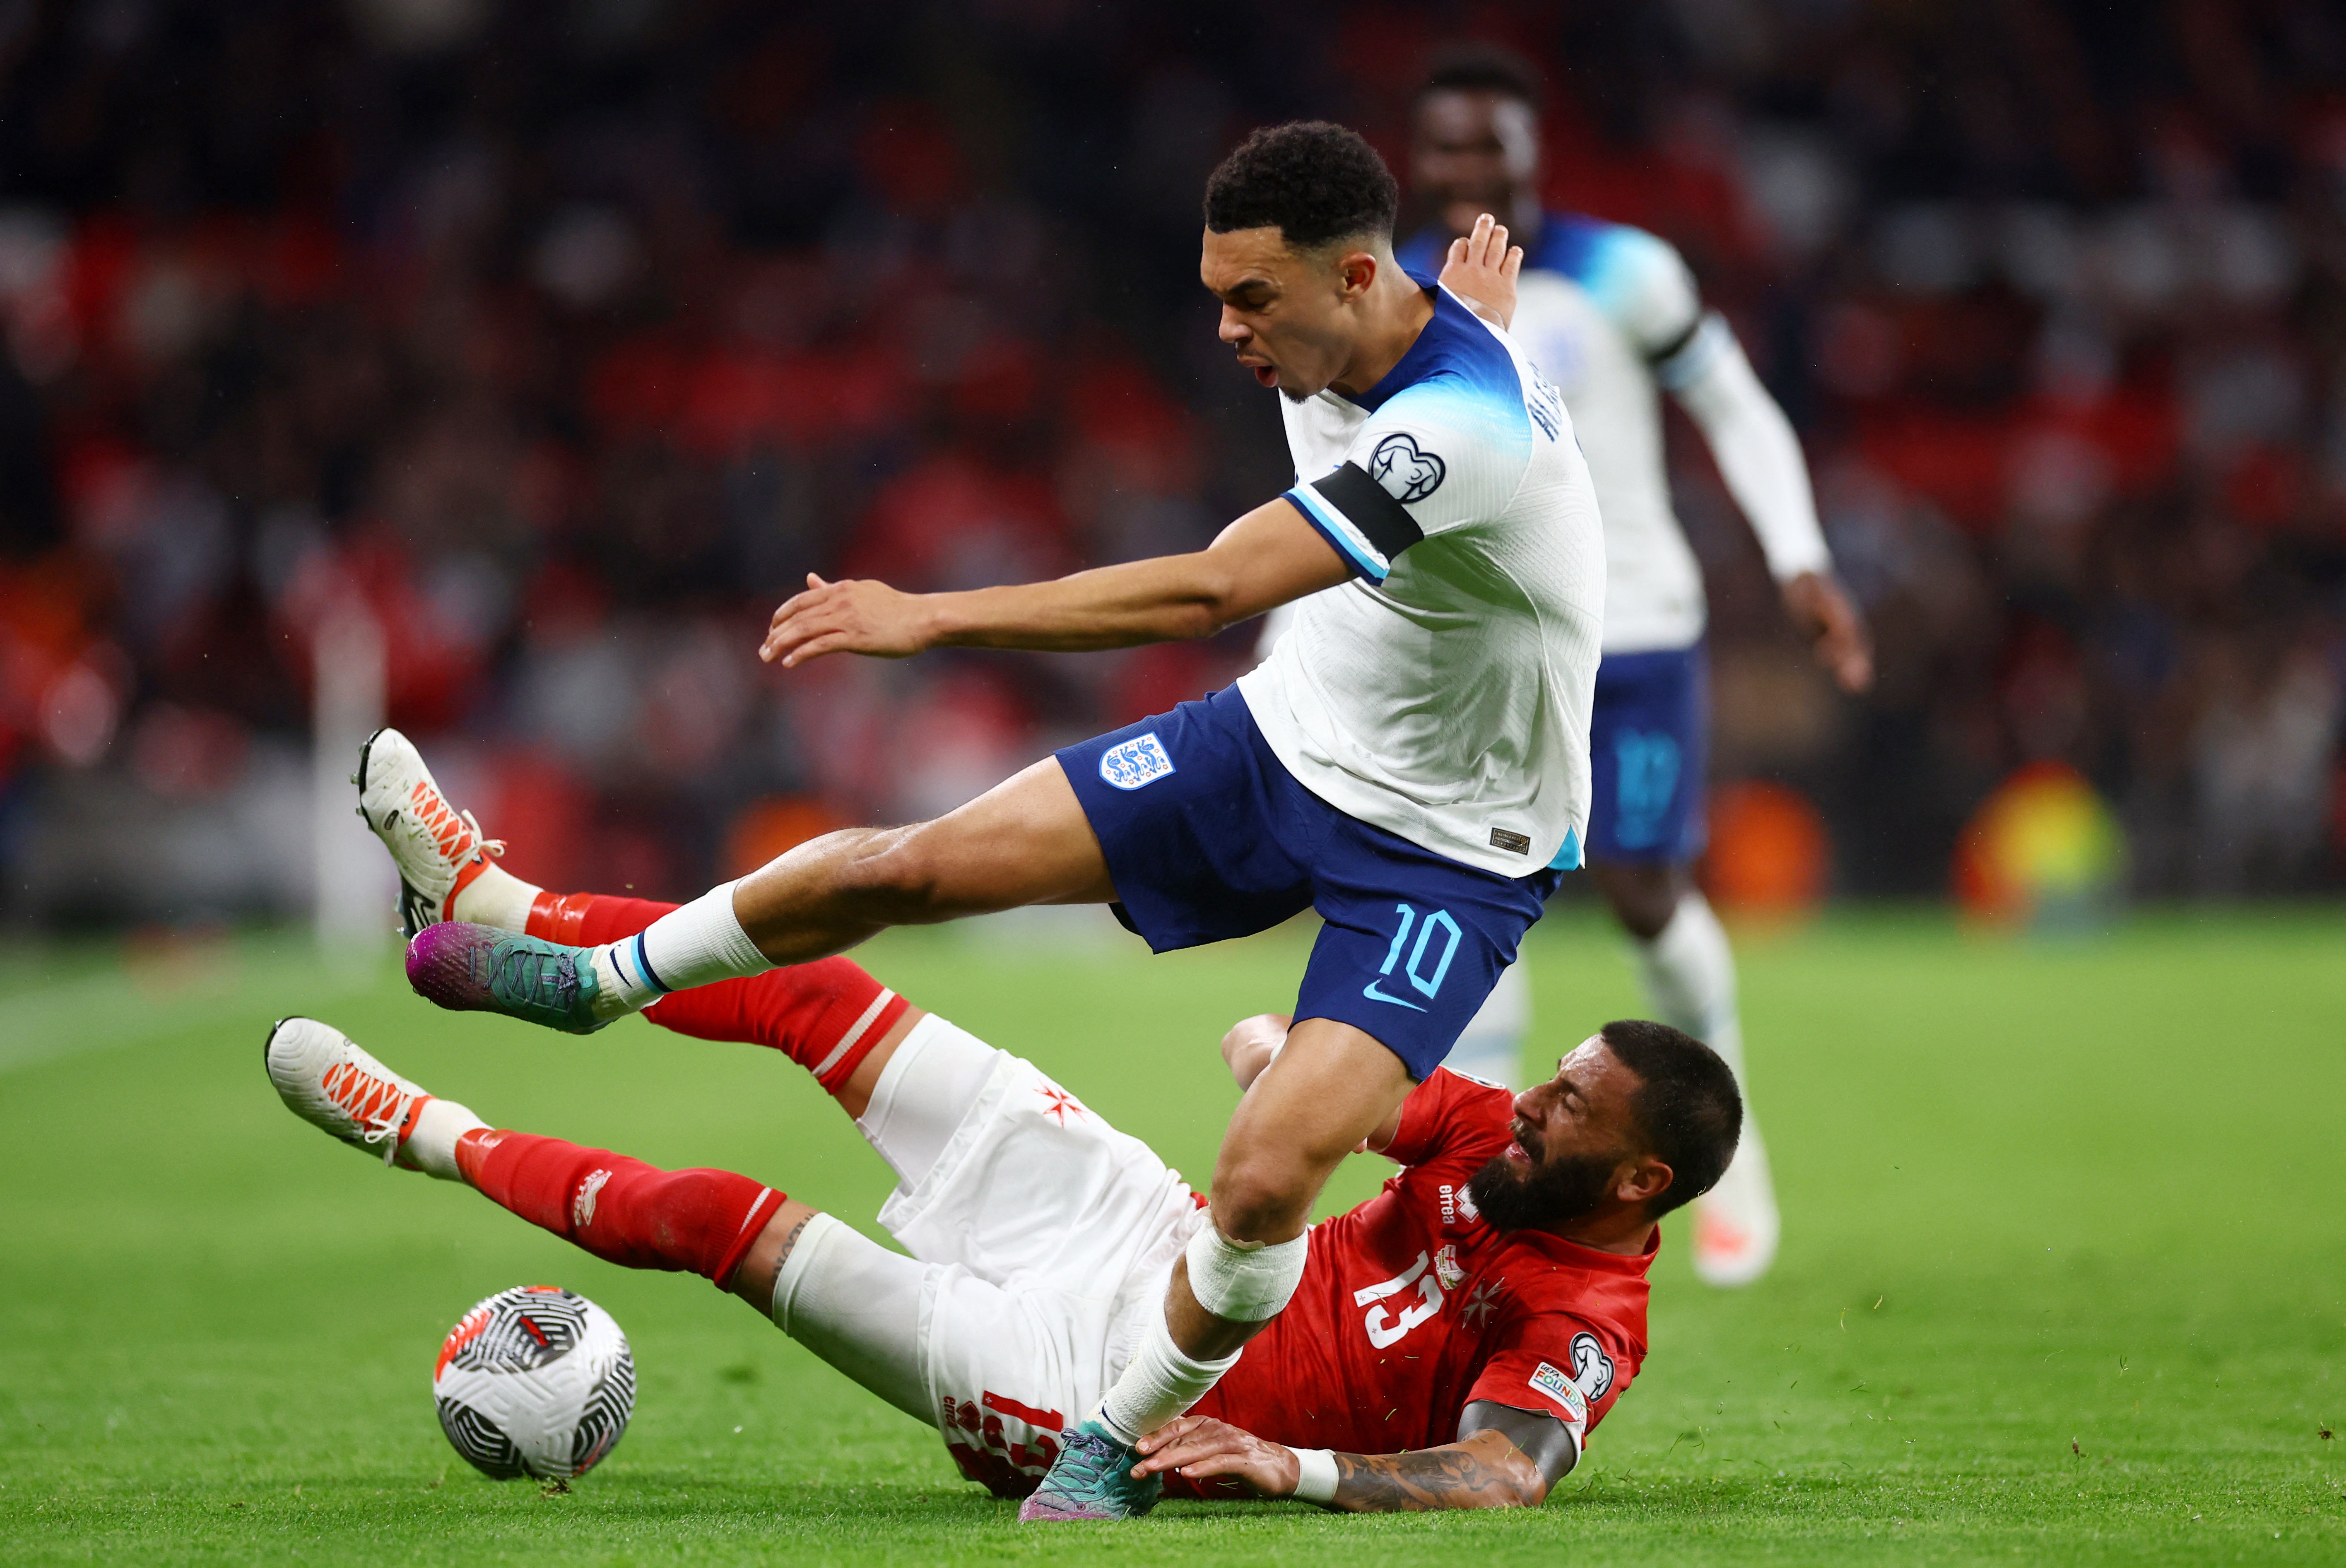 The Liverpool right back was everywhere for England on a flat night at Wembley